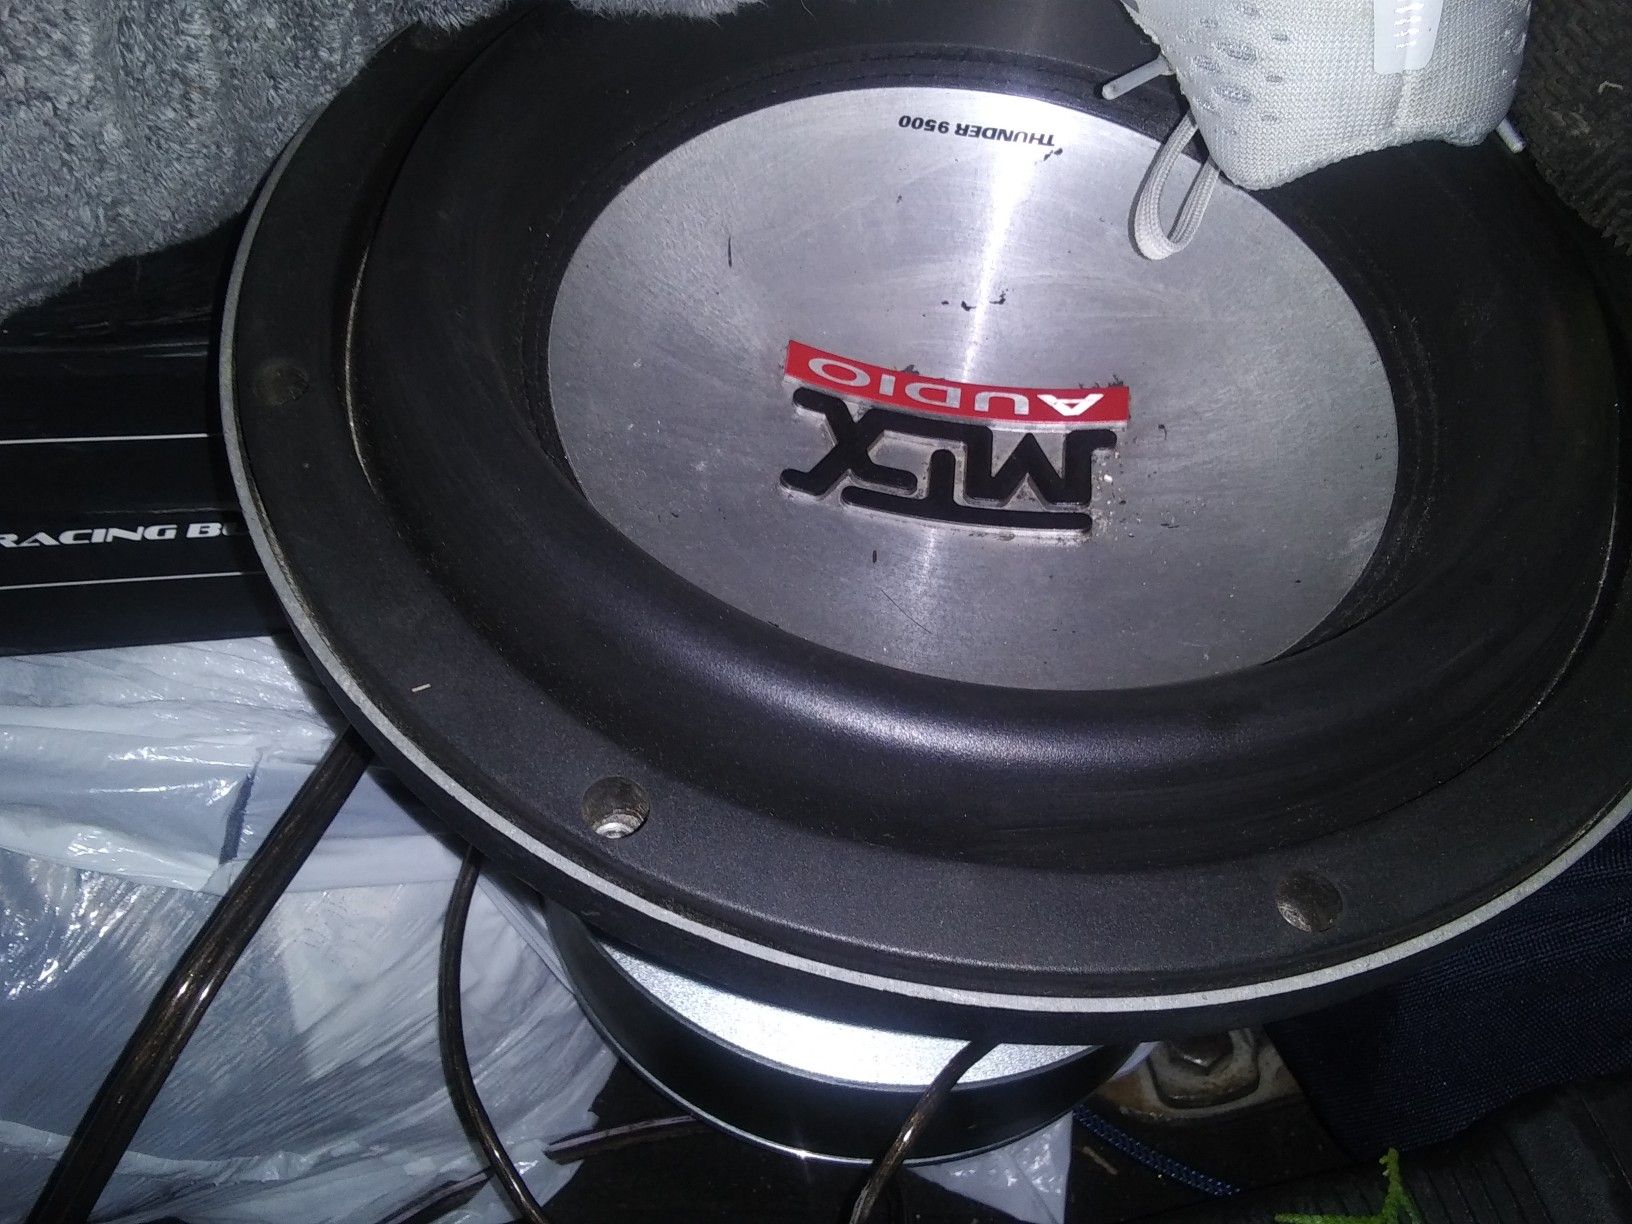 Mtx 9500 series aluminum cone w thread stitching don't make these any more. Subwoofer